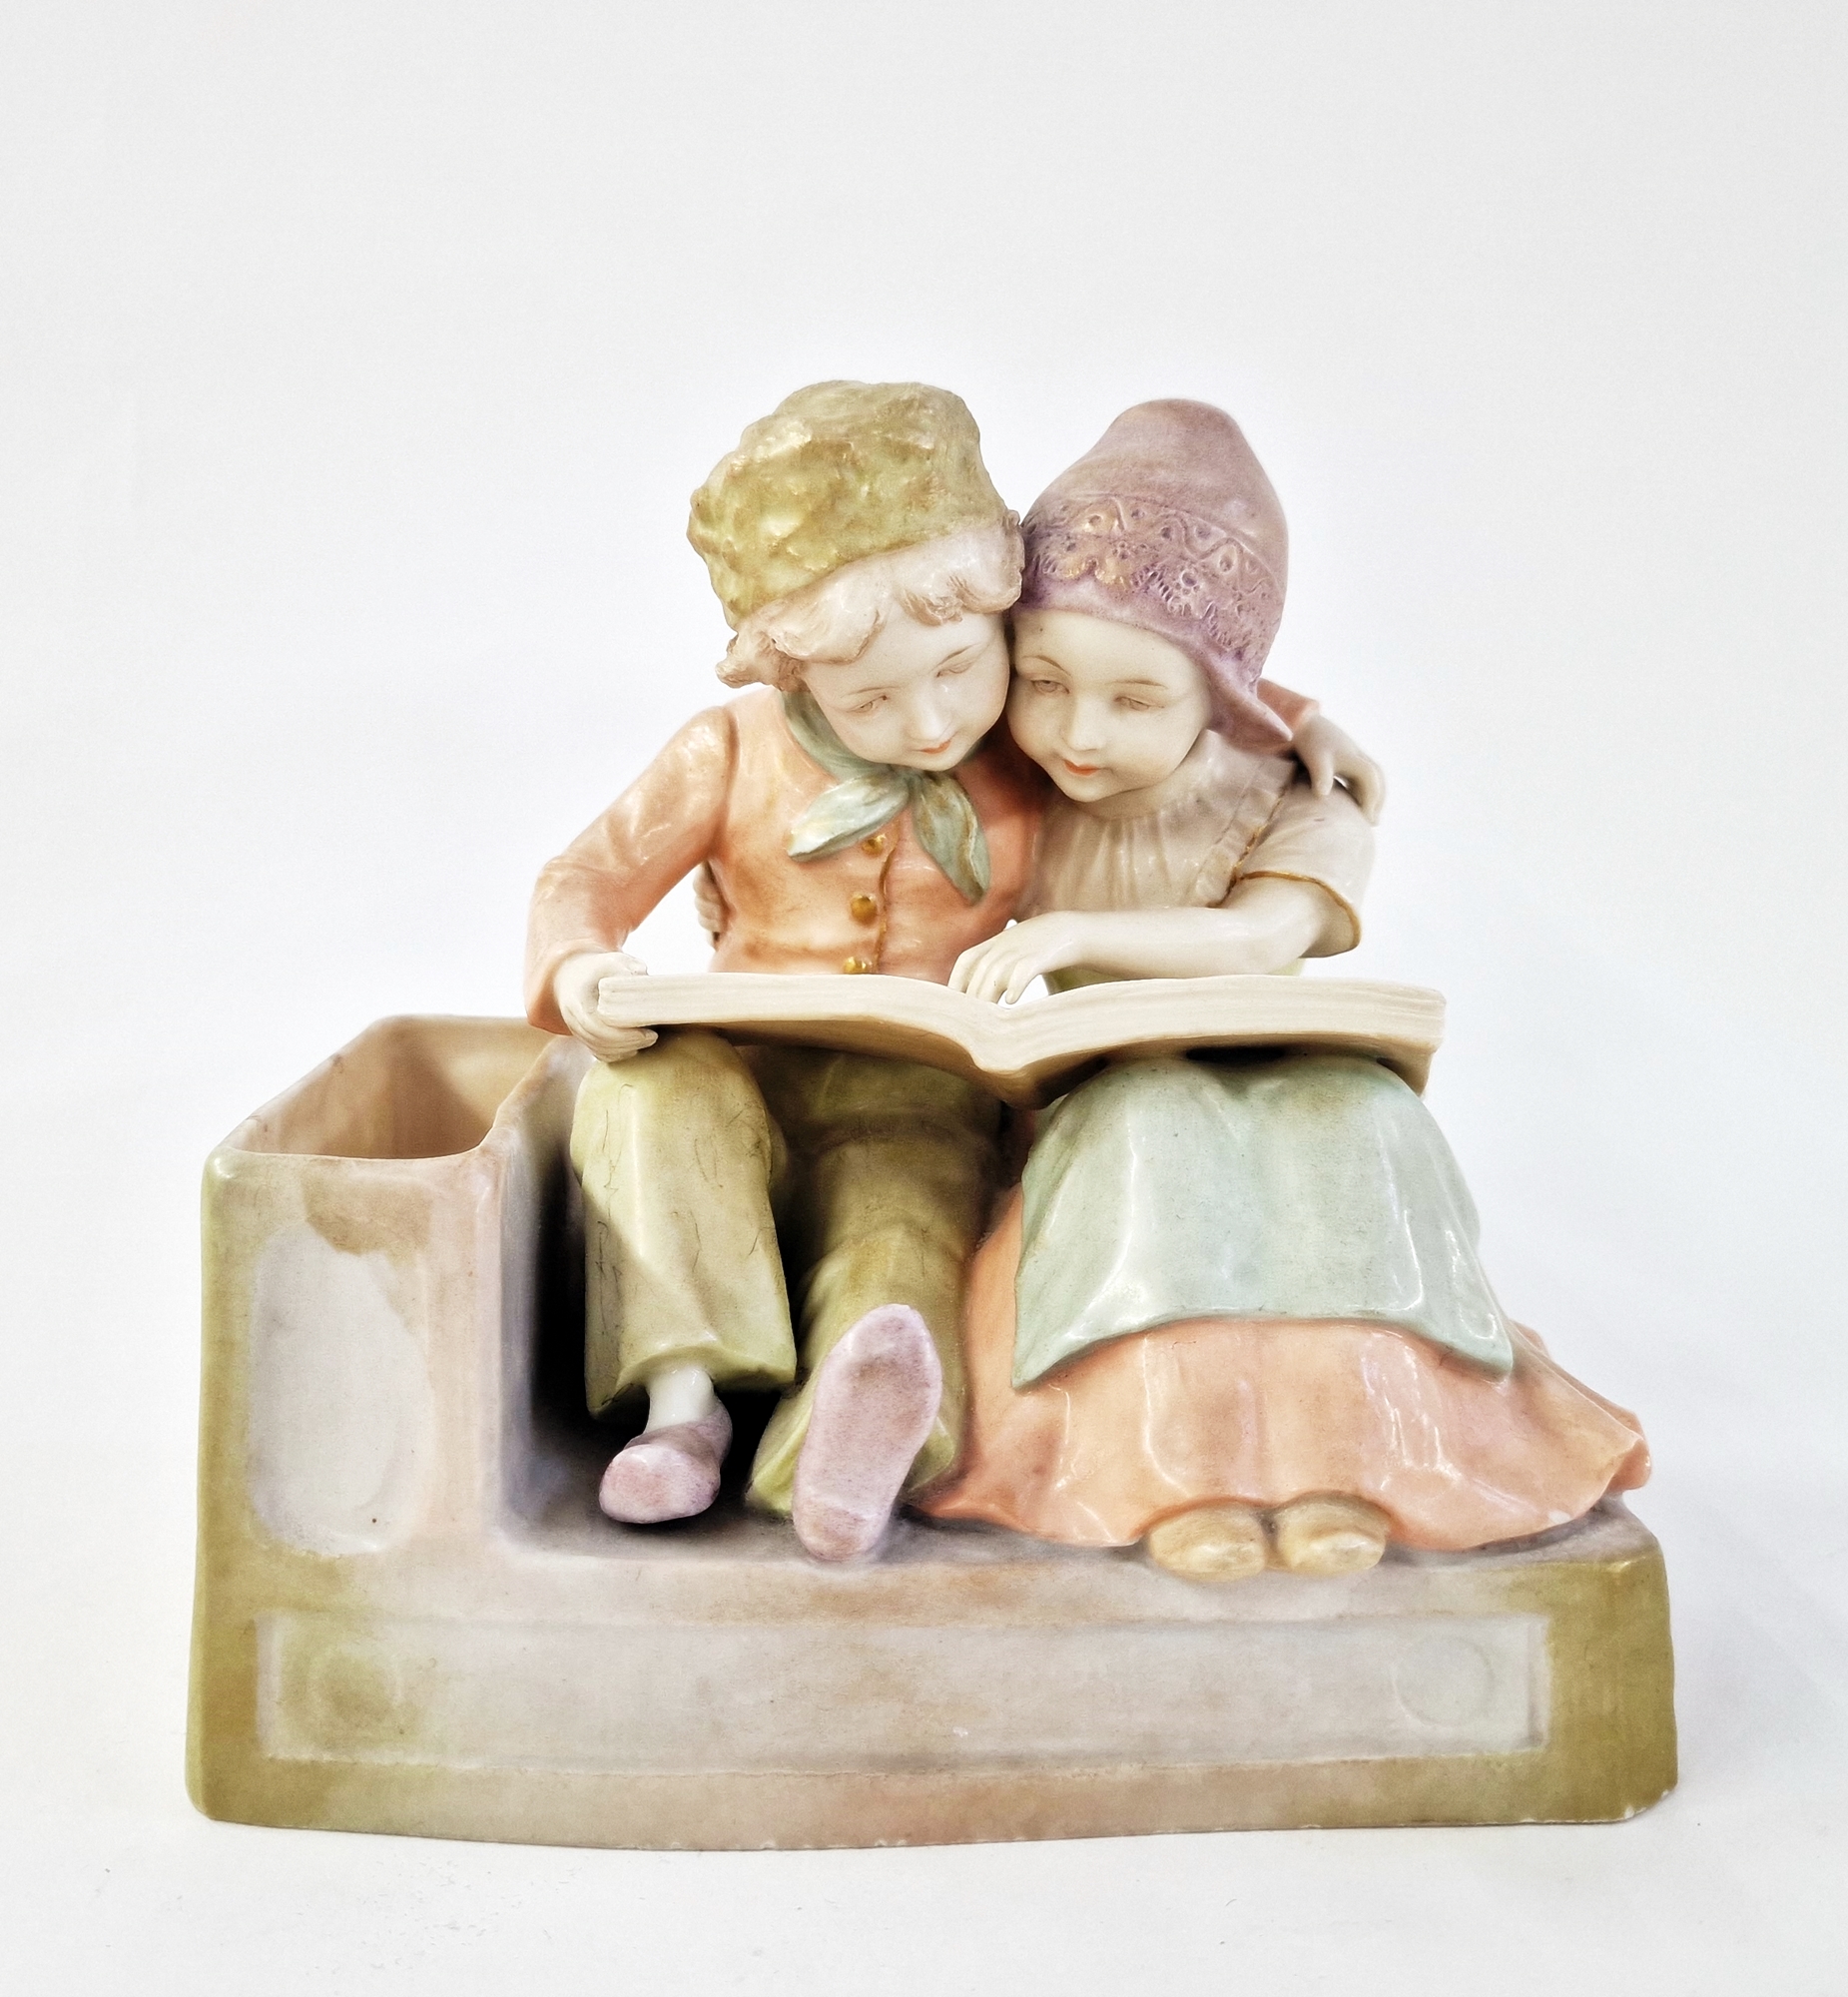 Early 20th century Vienna (Amphora) ceramic figure group of two Dutch-style children embracing,